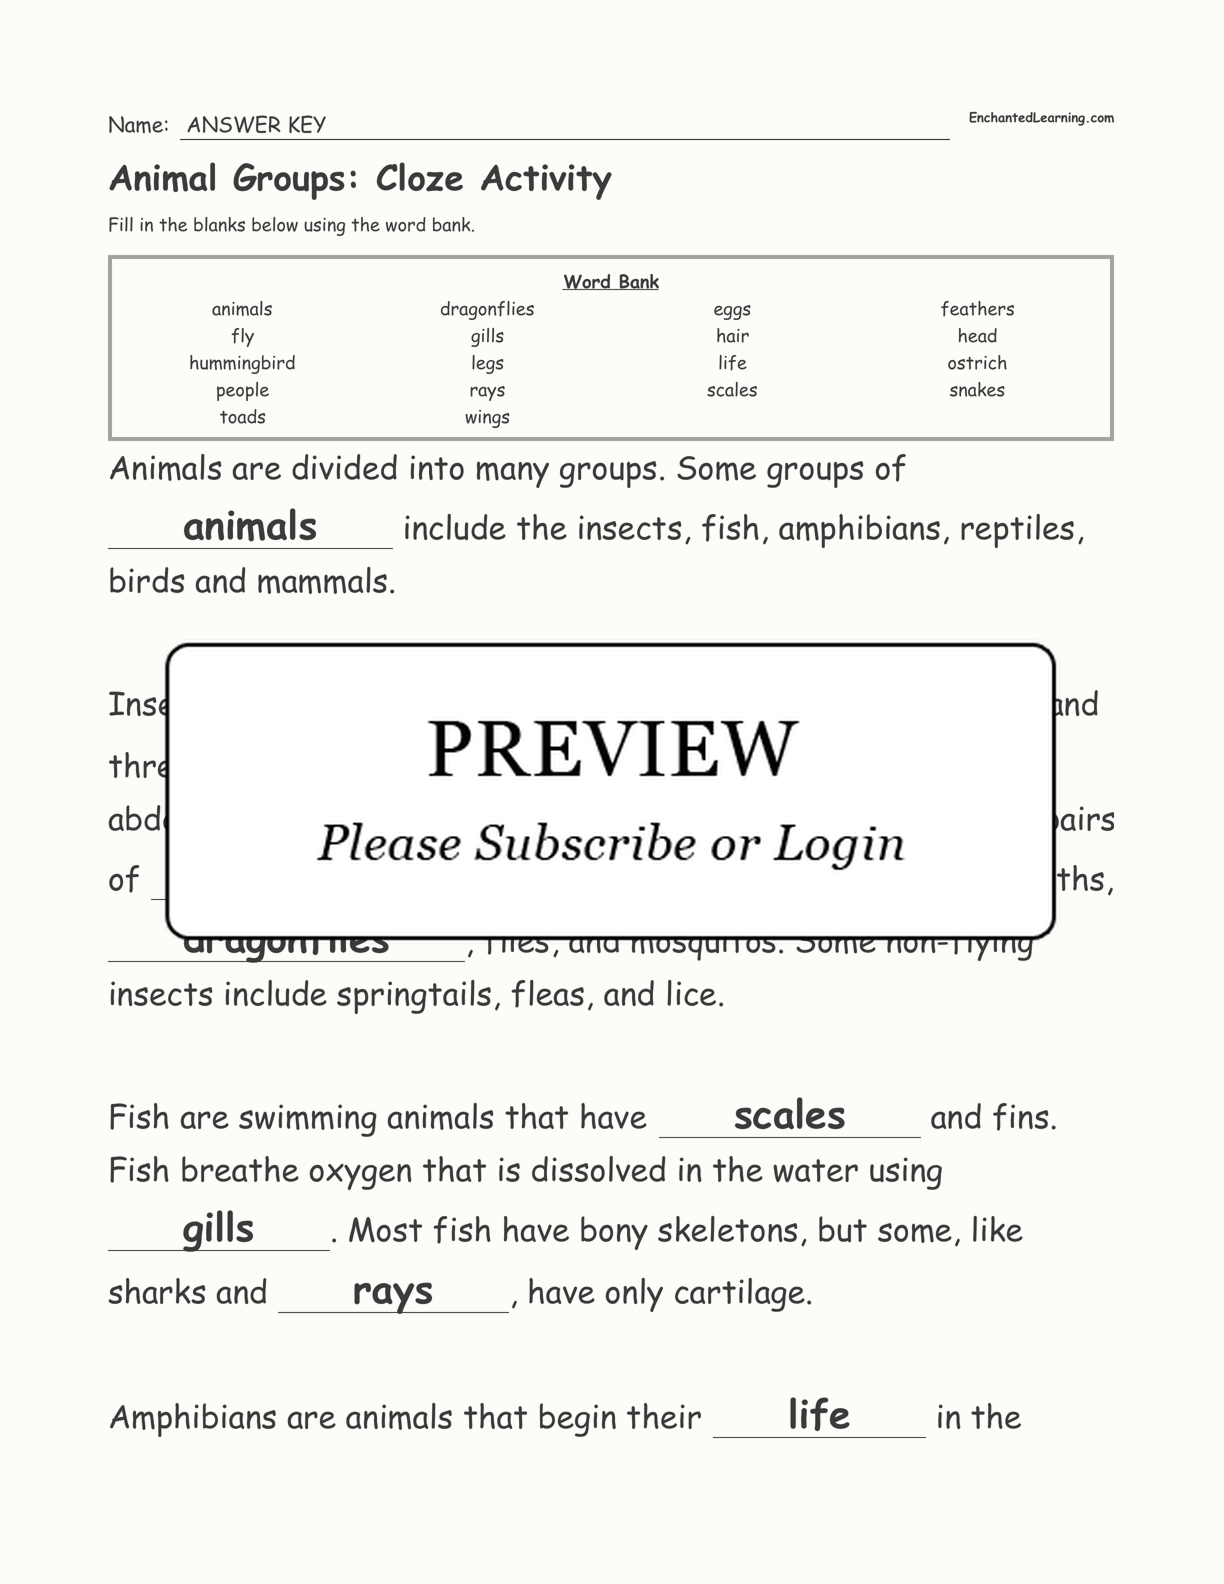 Animal Groups: Cloze Activity interactive worksheet page 3